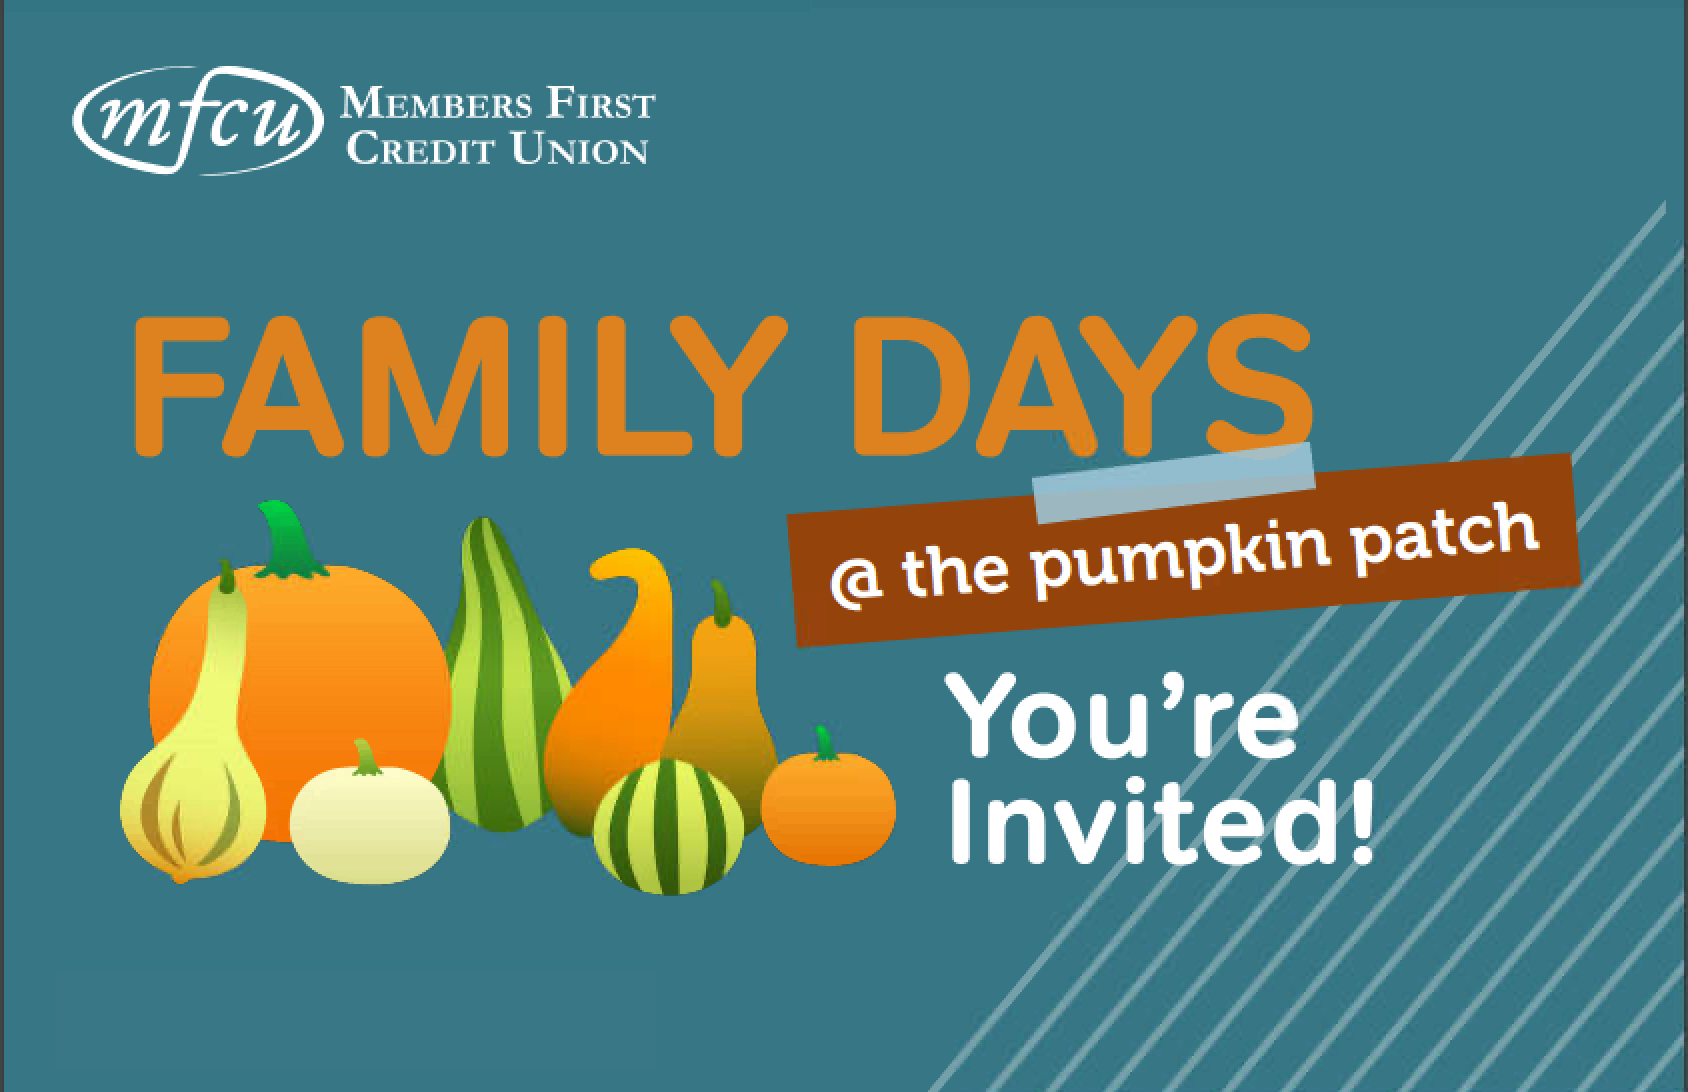 You're Invited to Family Days at the Pumpkin Patch!